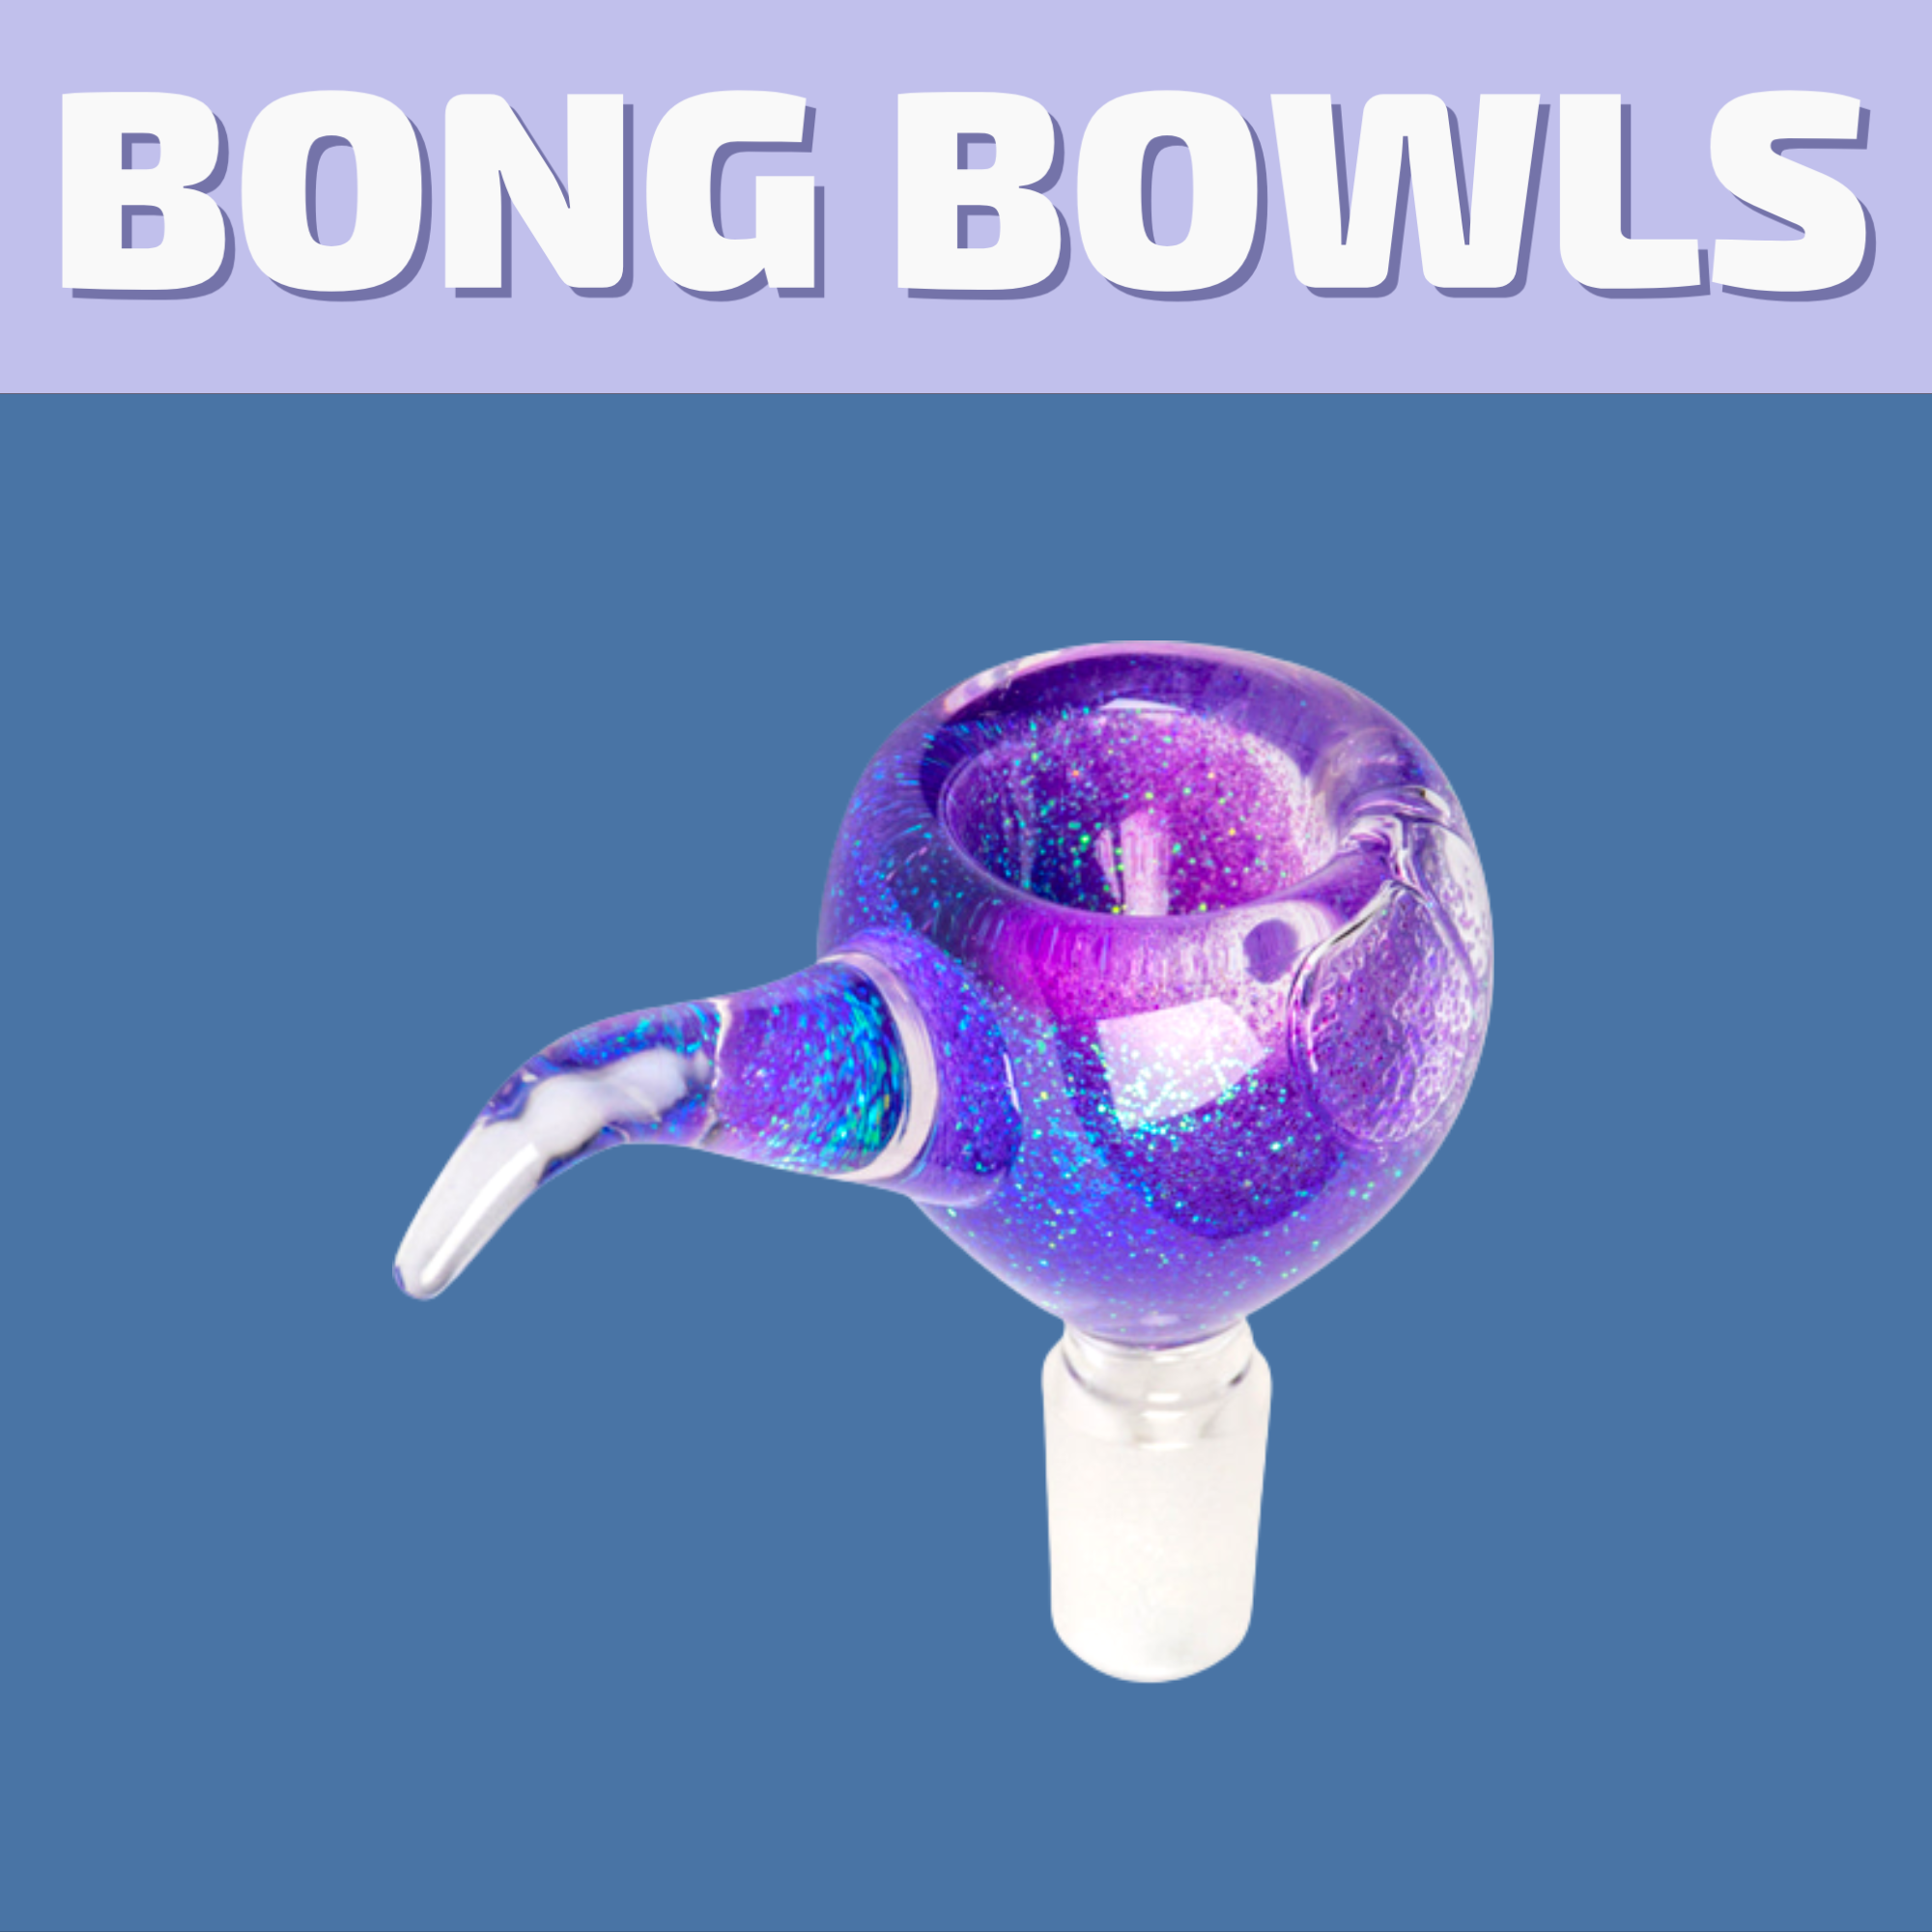 Shop Winnipeg's best selection of bong bowls, pull outs, adaptors, and downstems for same day delivery or buy them in-store.